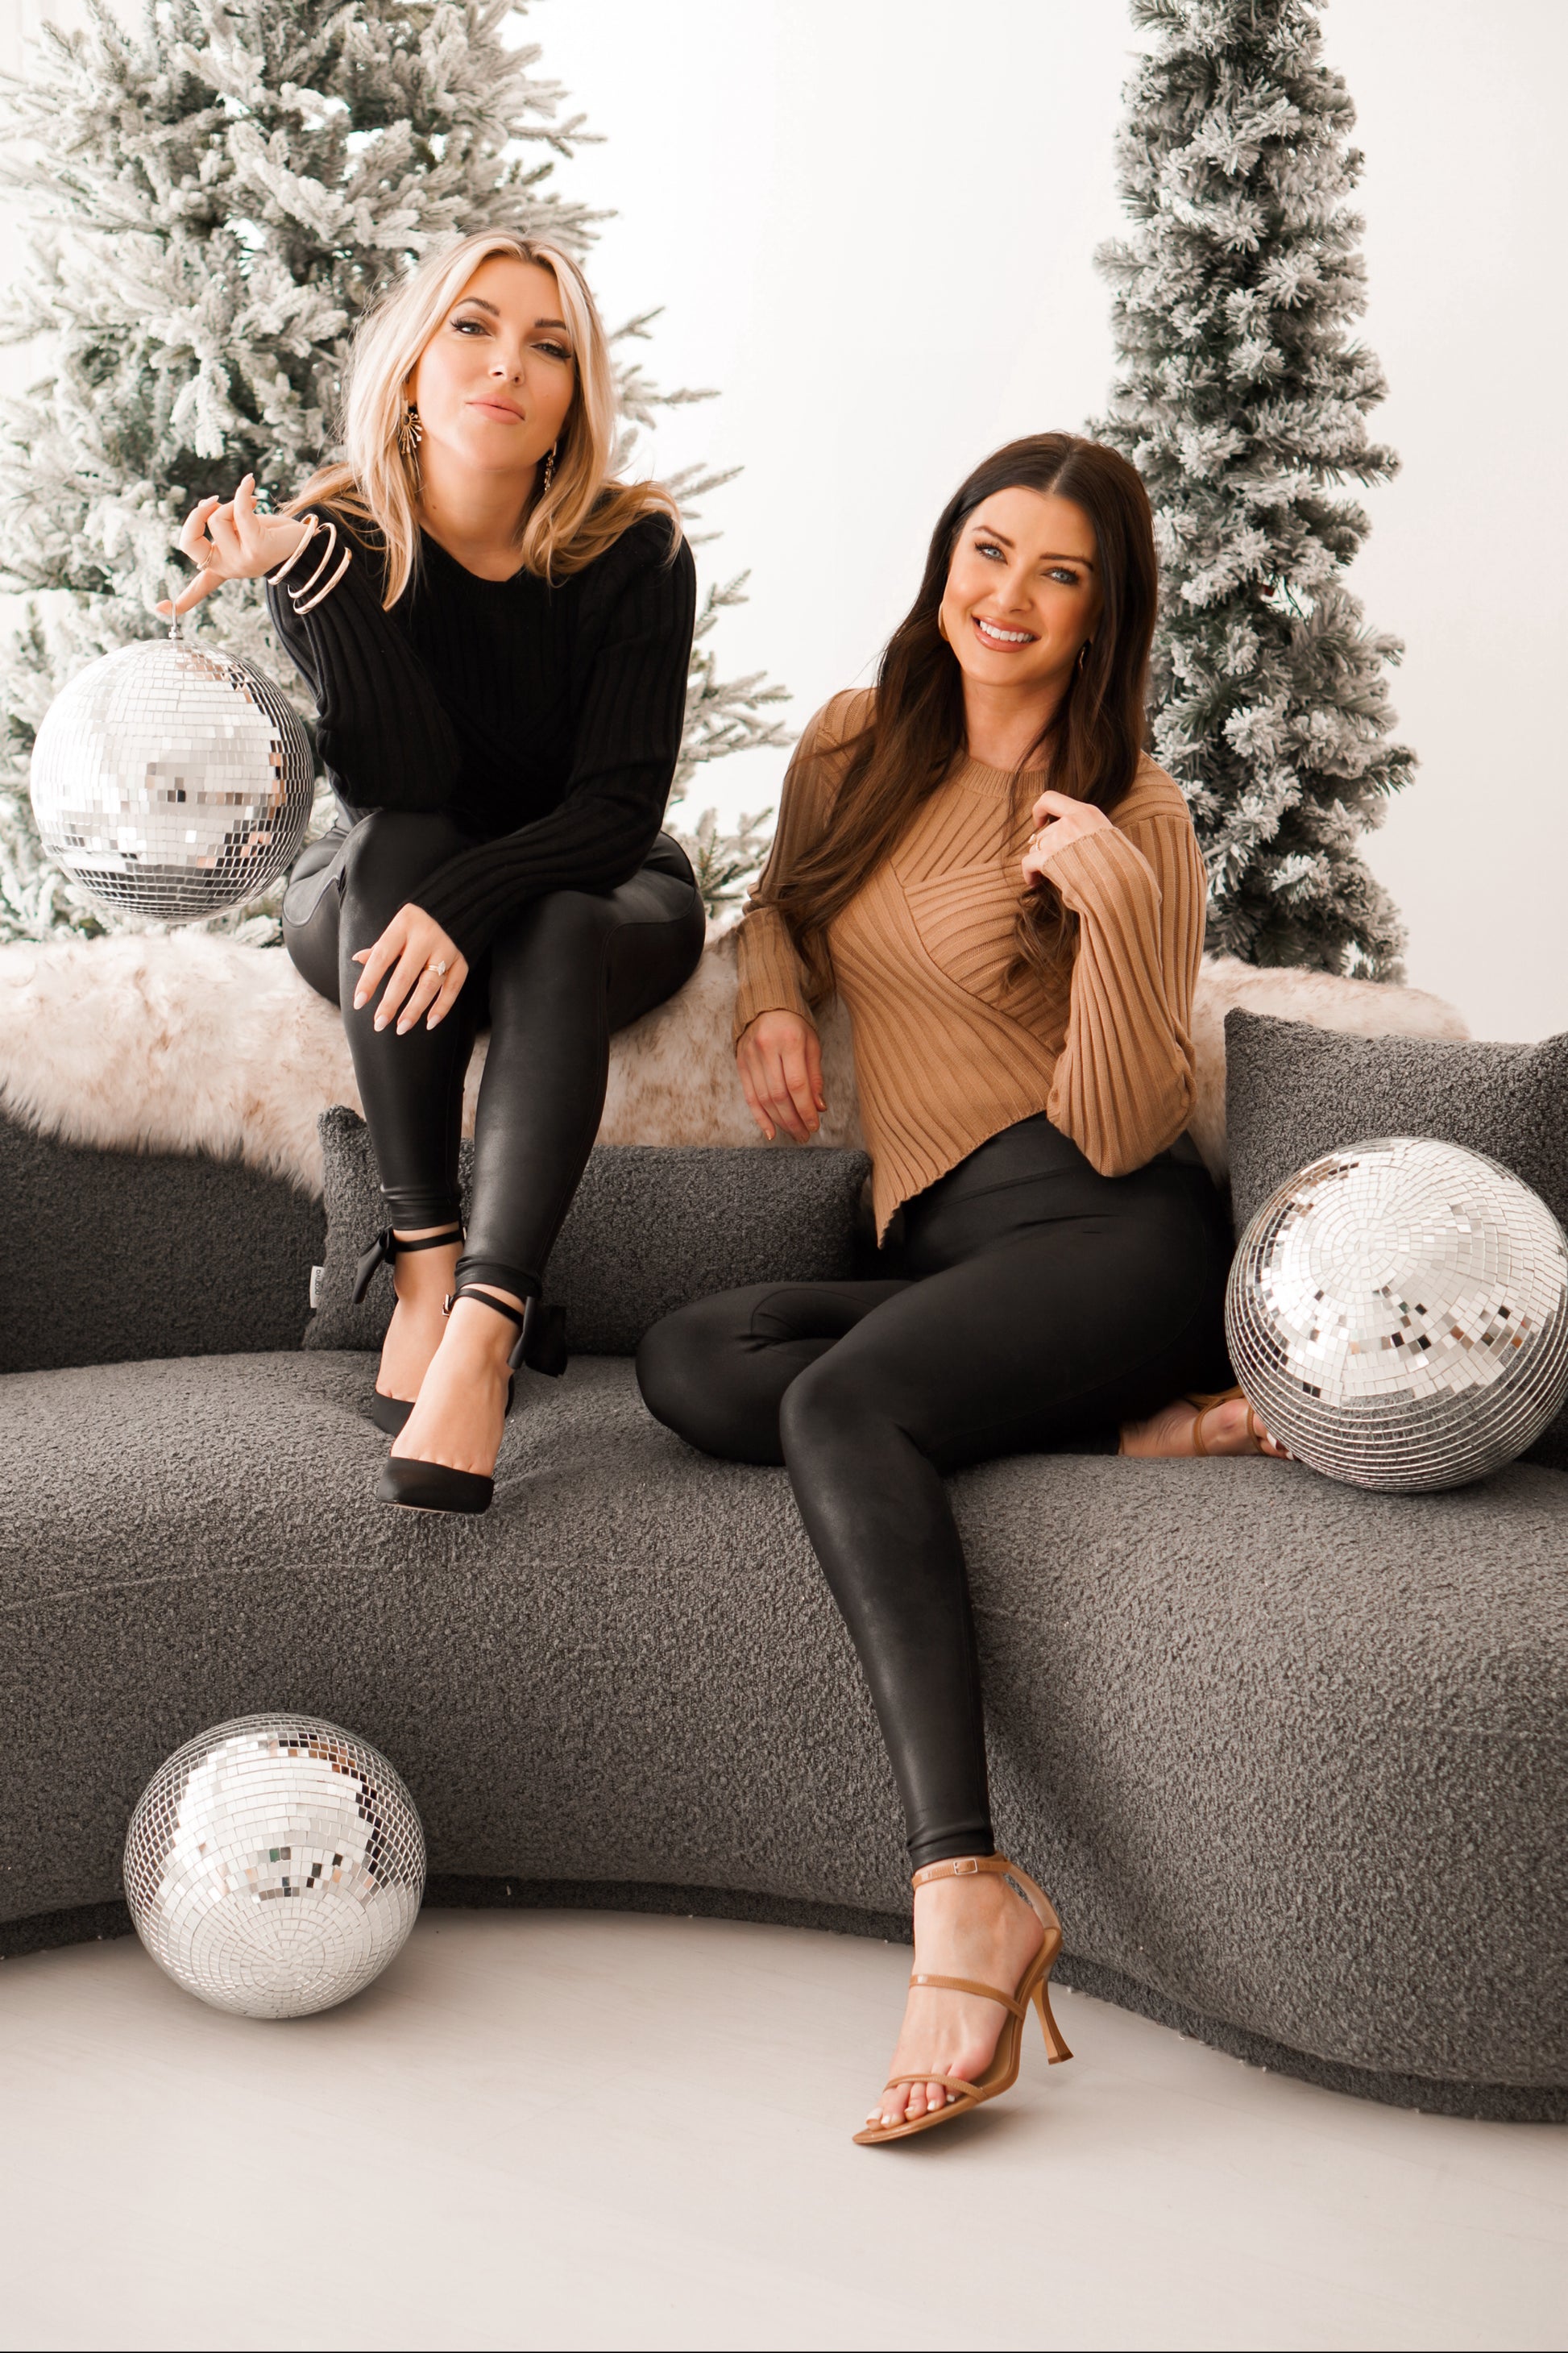 Blonde girl wearing black sweater with V detail in front with Brunette girl wearing same sweater top with V detail on the bottom in tan. They are both sitting on gray couch with disco balls. 